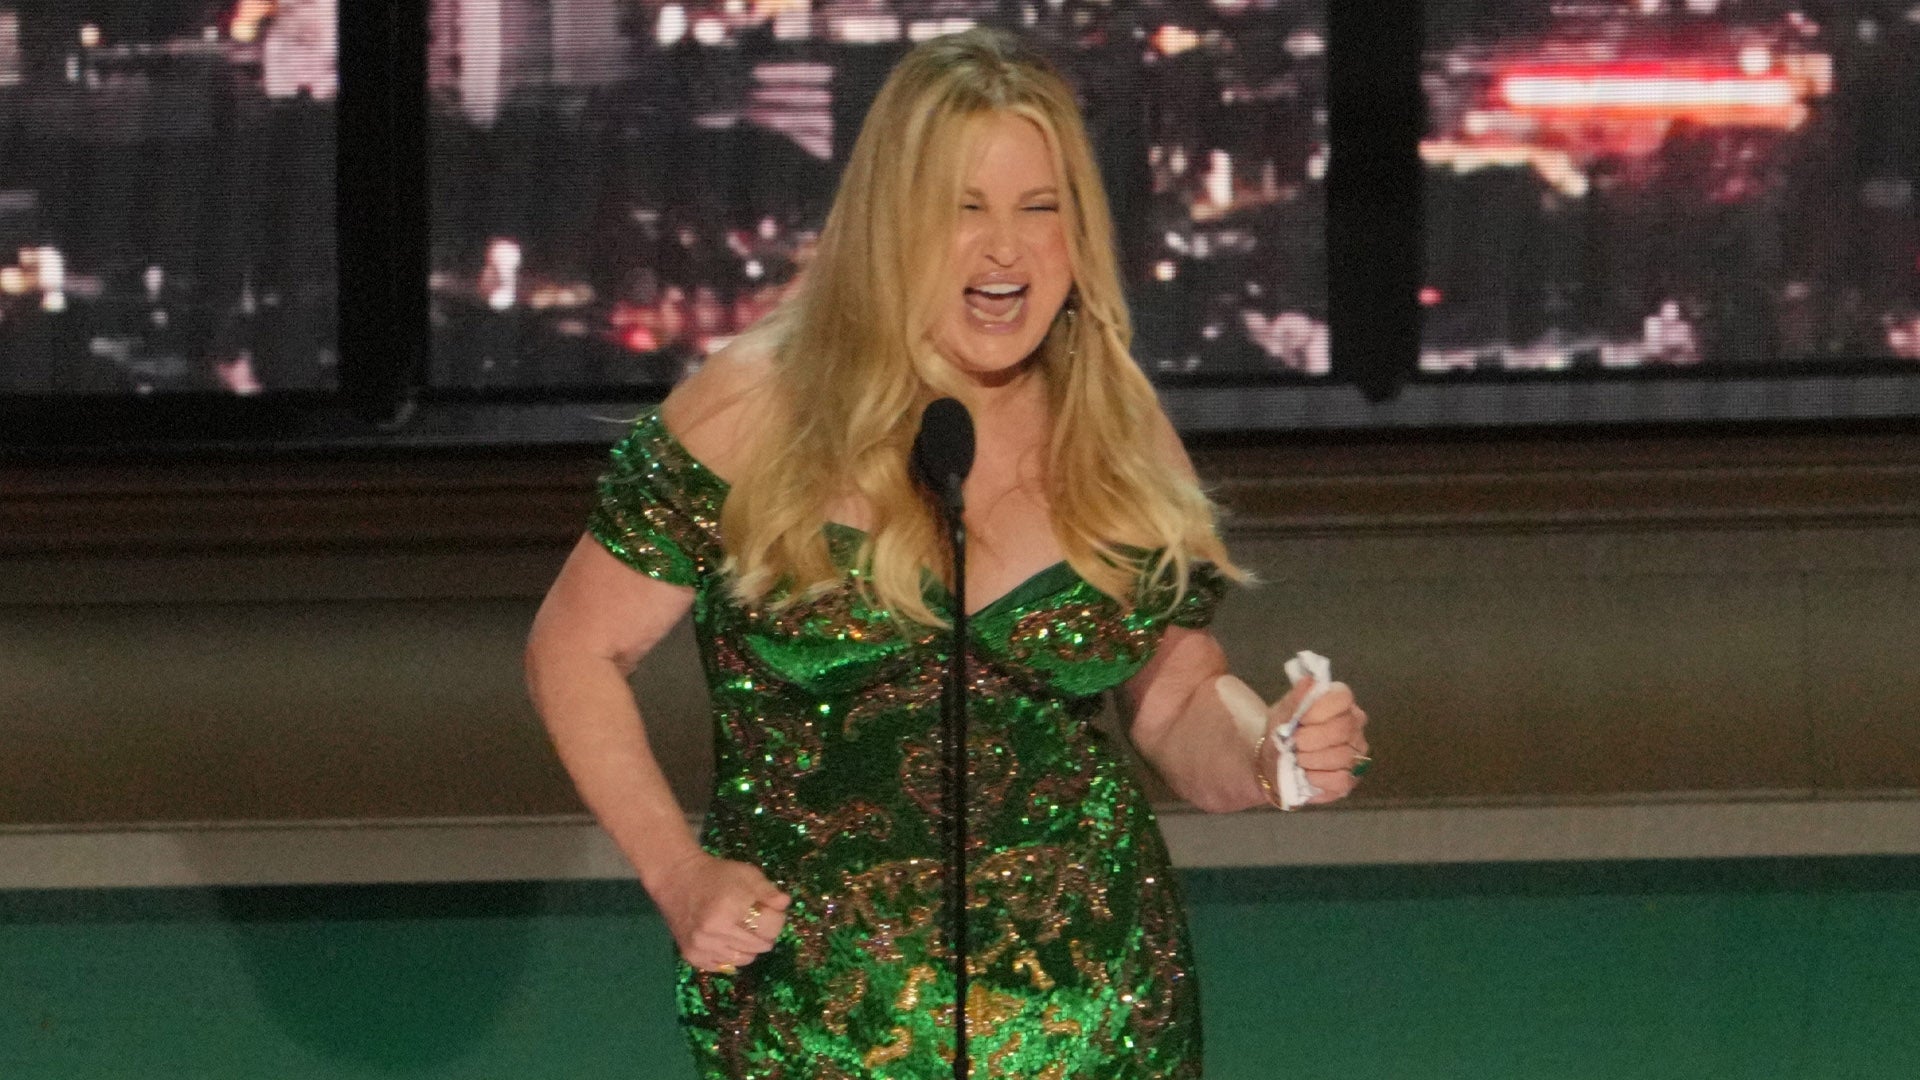 Emmys 2022: Jennifer Coolidge Delivers Comically Chaotic Acceptance Speech